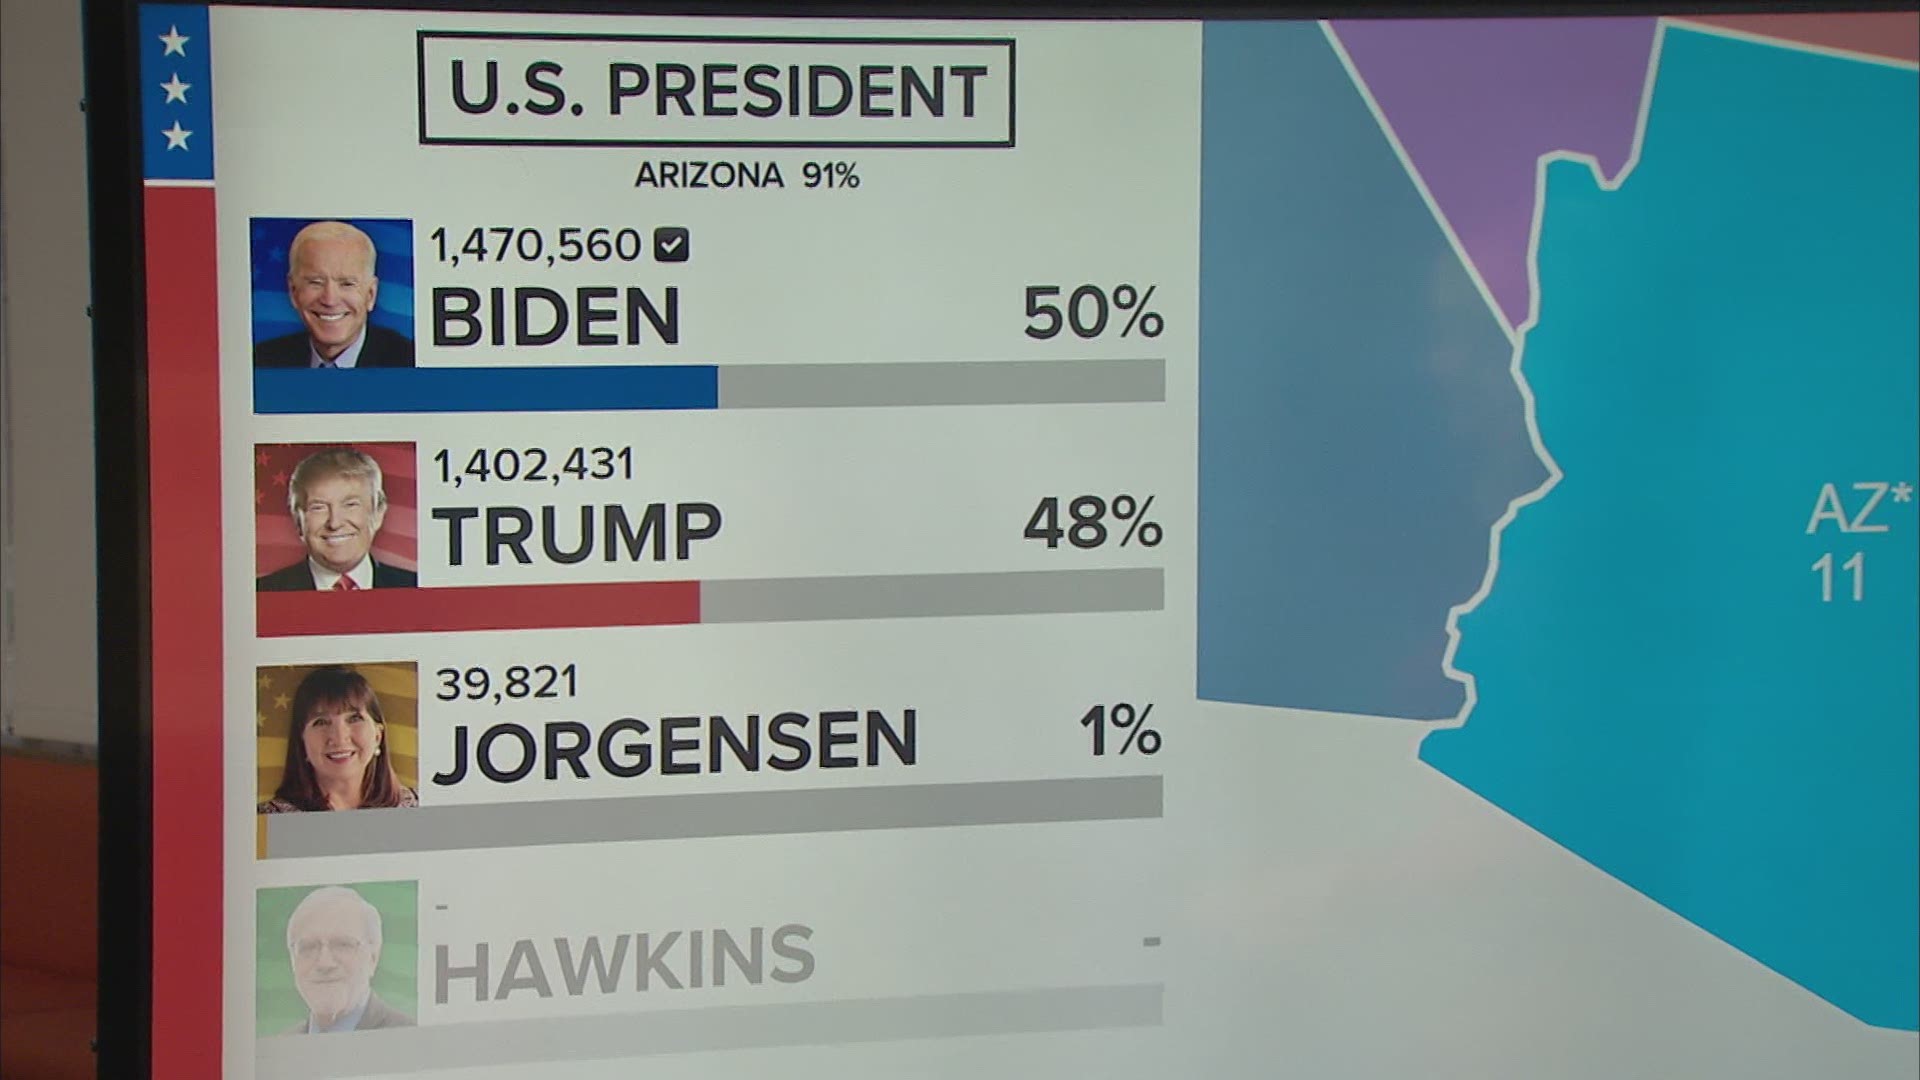 The Associated Press says it is monitoring the vote count as it comes in. The AP has called the presidential race in Arizona for Democrat Joe Biden.